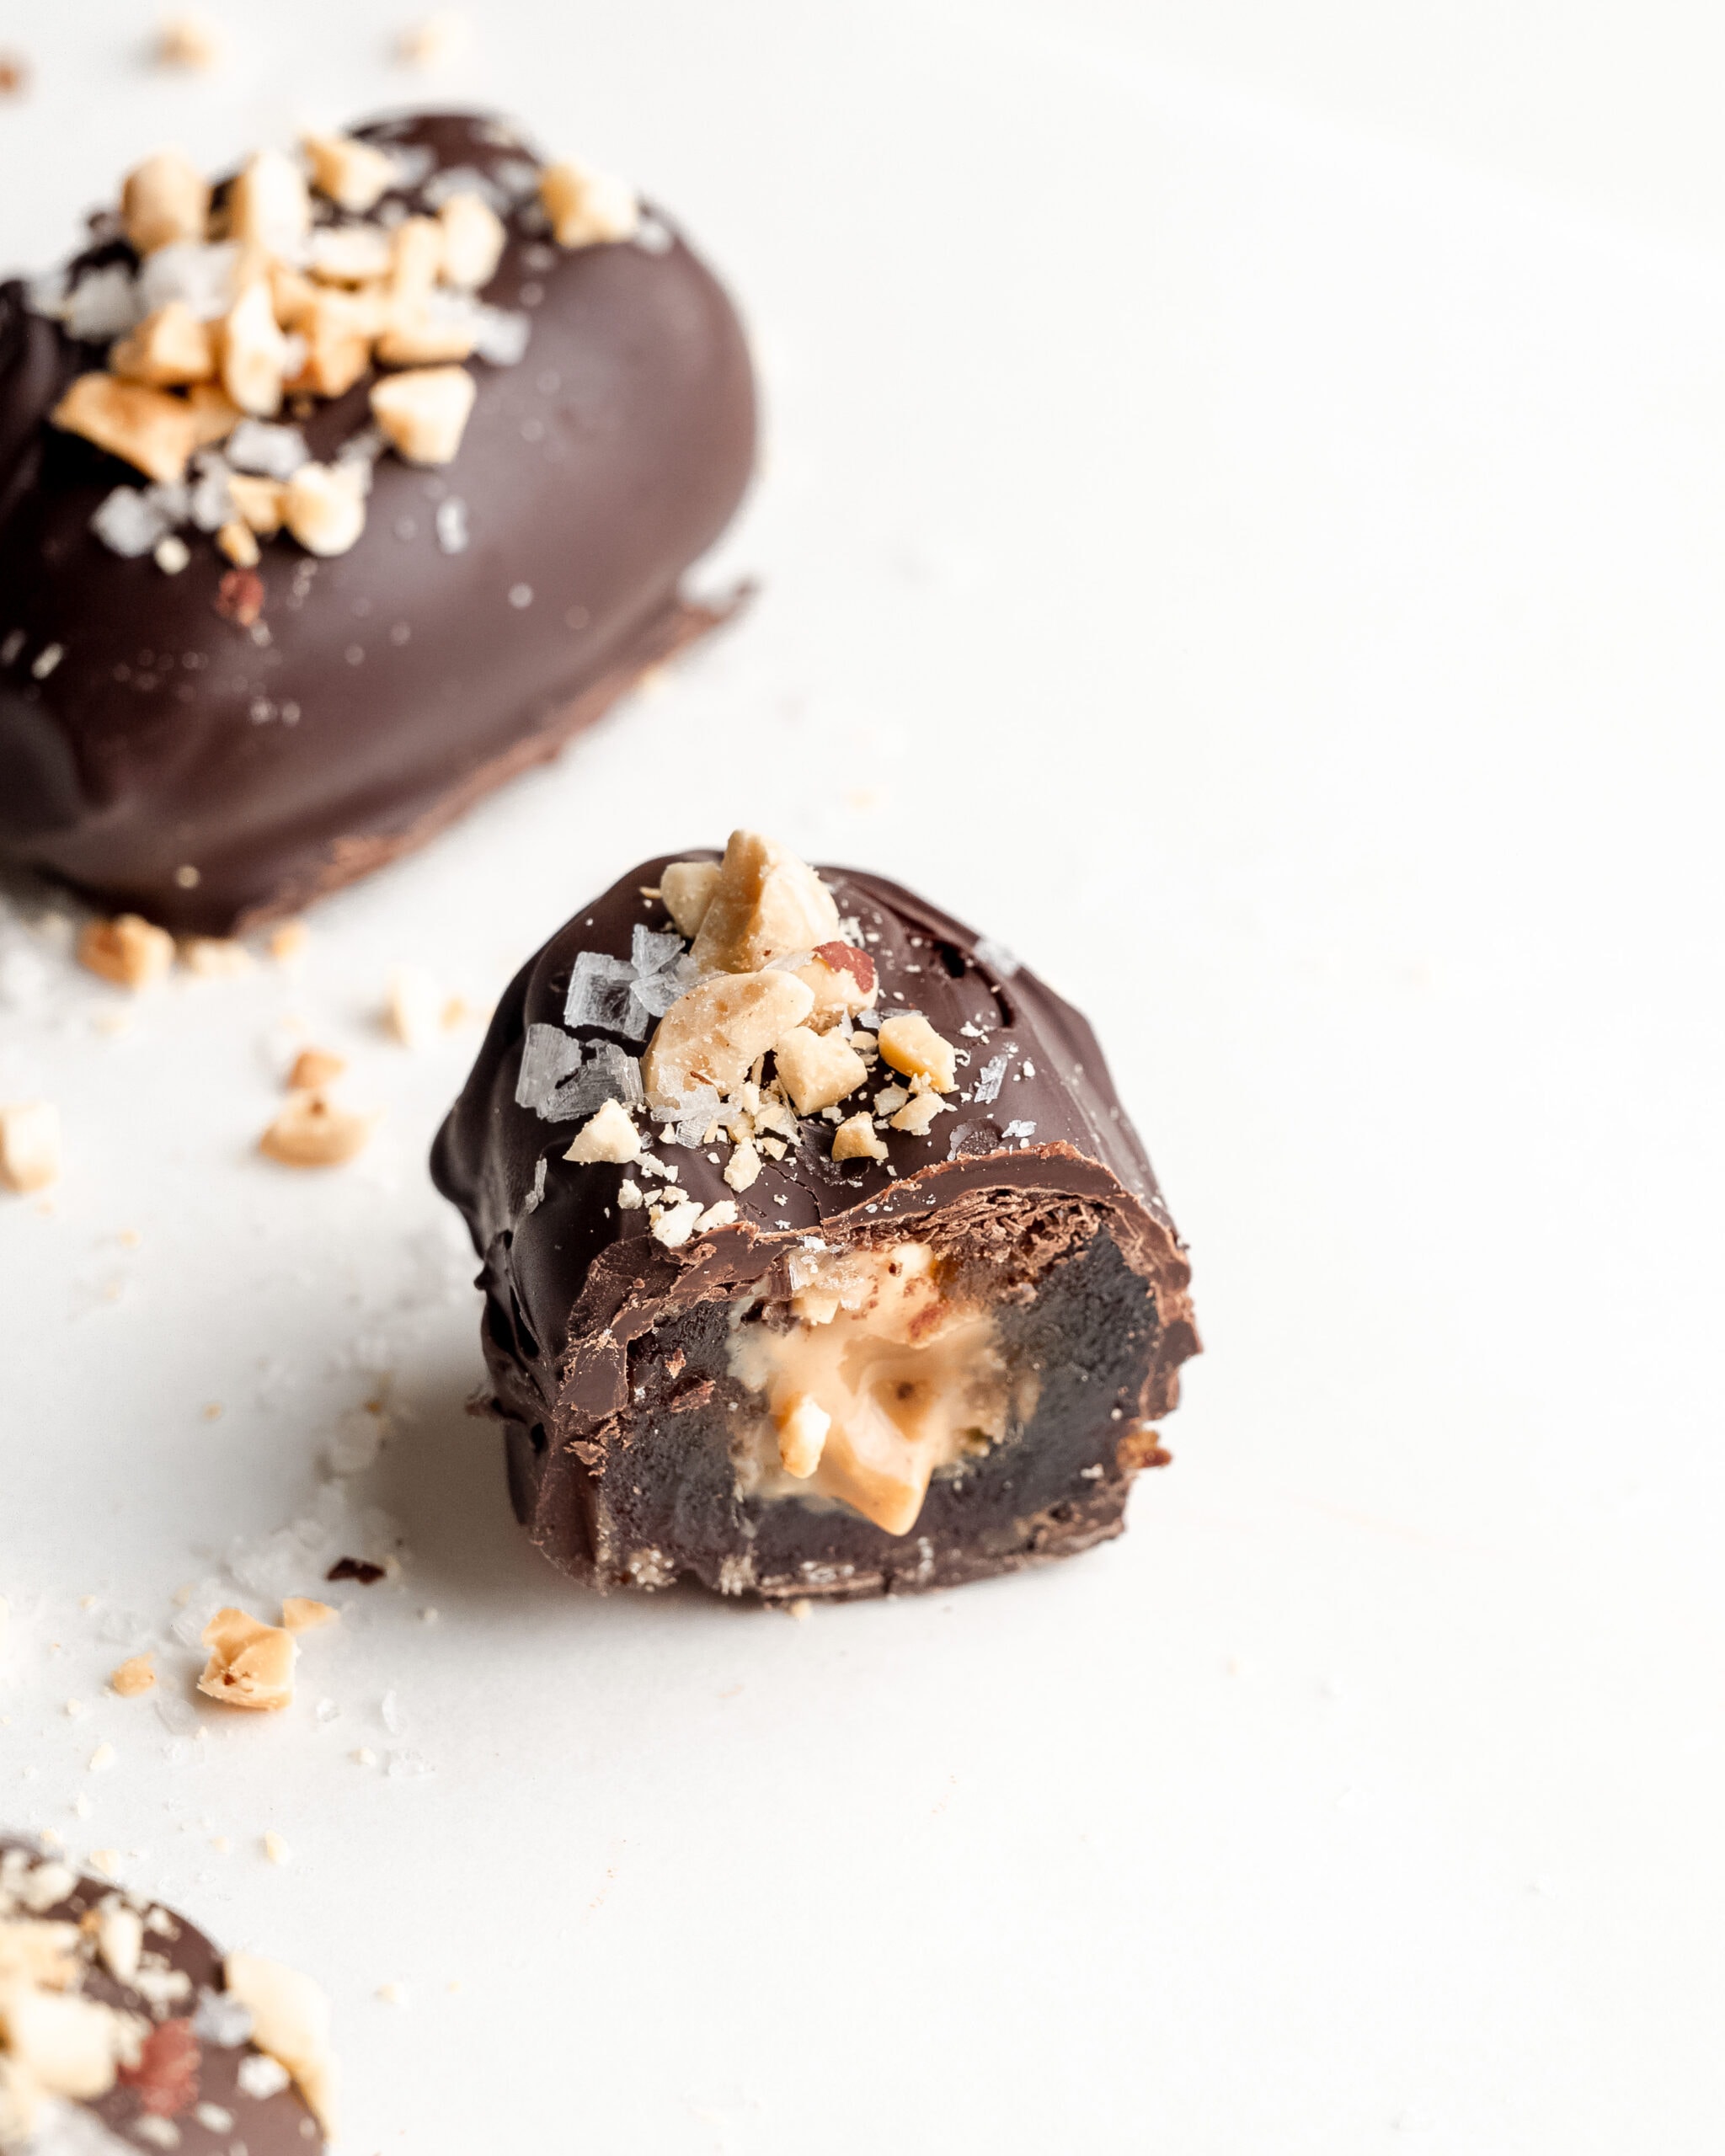 A chocolate covered stuffed date with peanut butter, cut in half with drippy peanut butter inside.